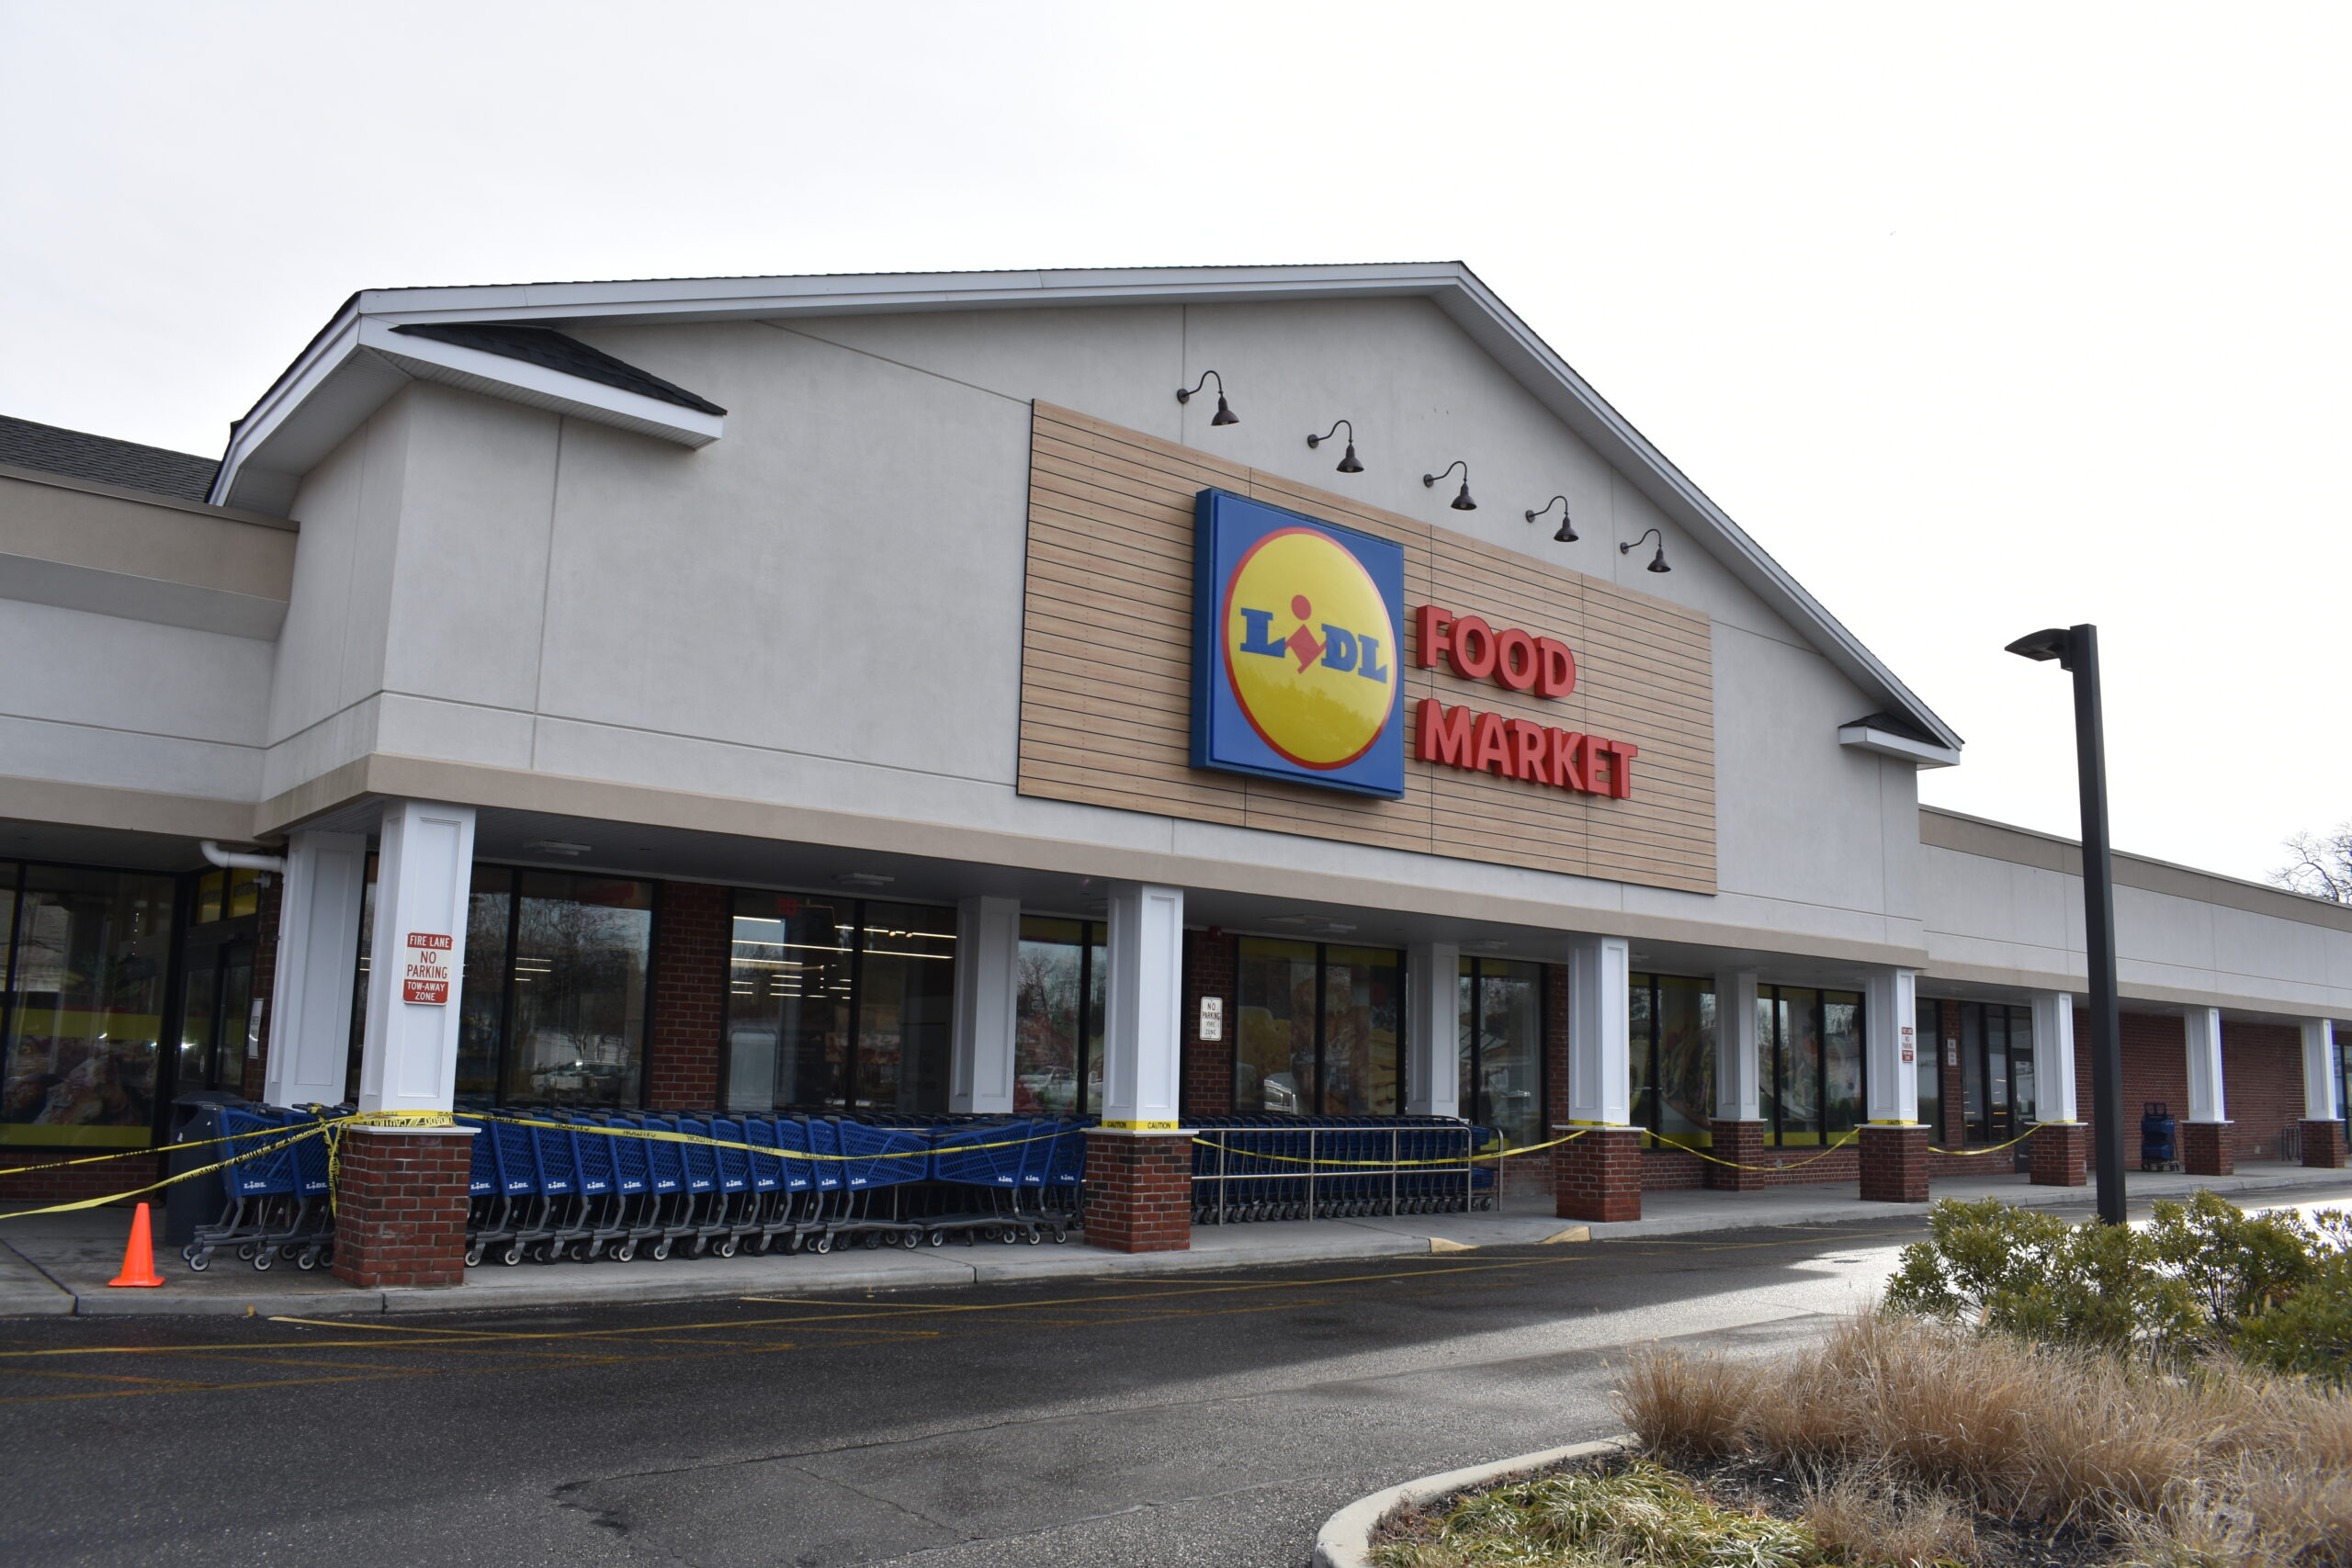 Lidl in Westhampton Beach on Monday, February 6, still closed for repairs. BRENDAN J. O'REILLY